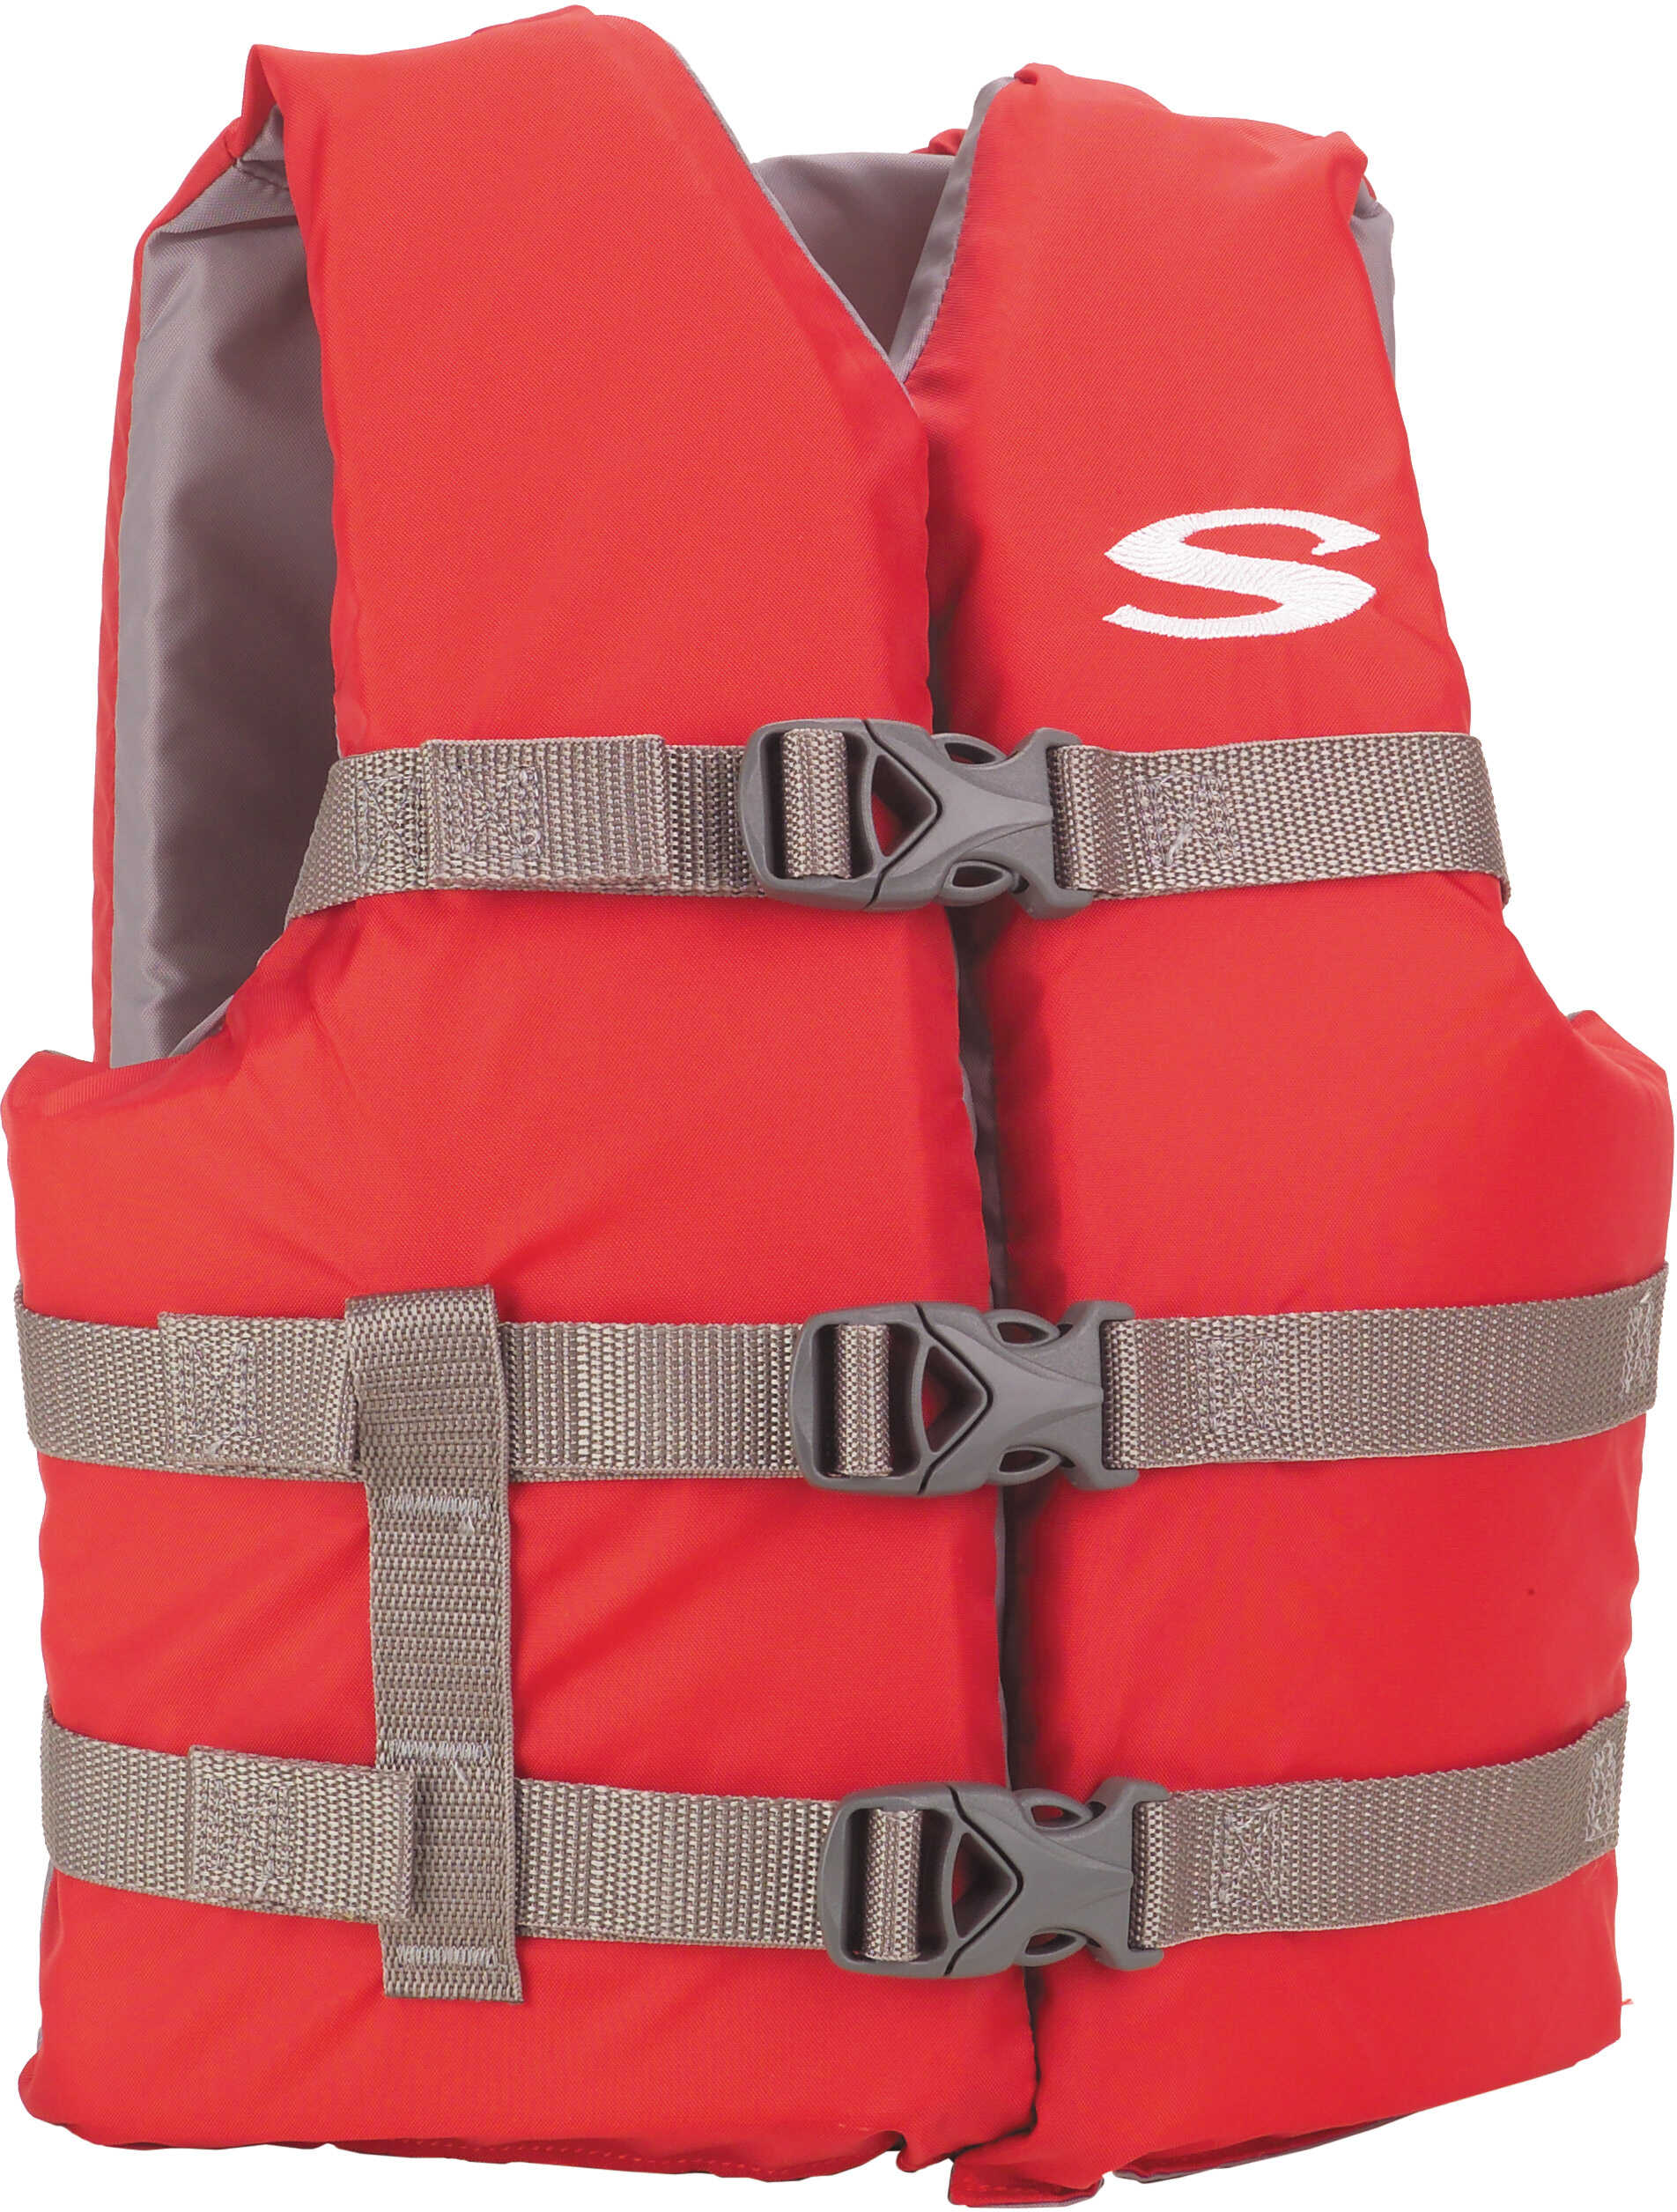 Stearns Pfd 3007 Cat Boating Vest Youth Red 3000001415